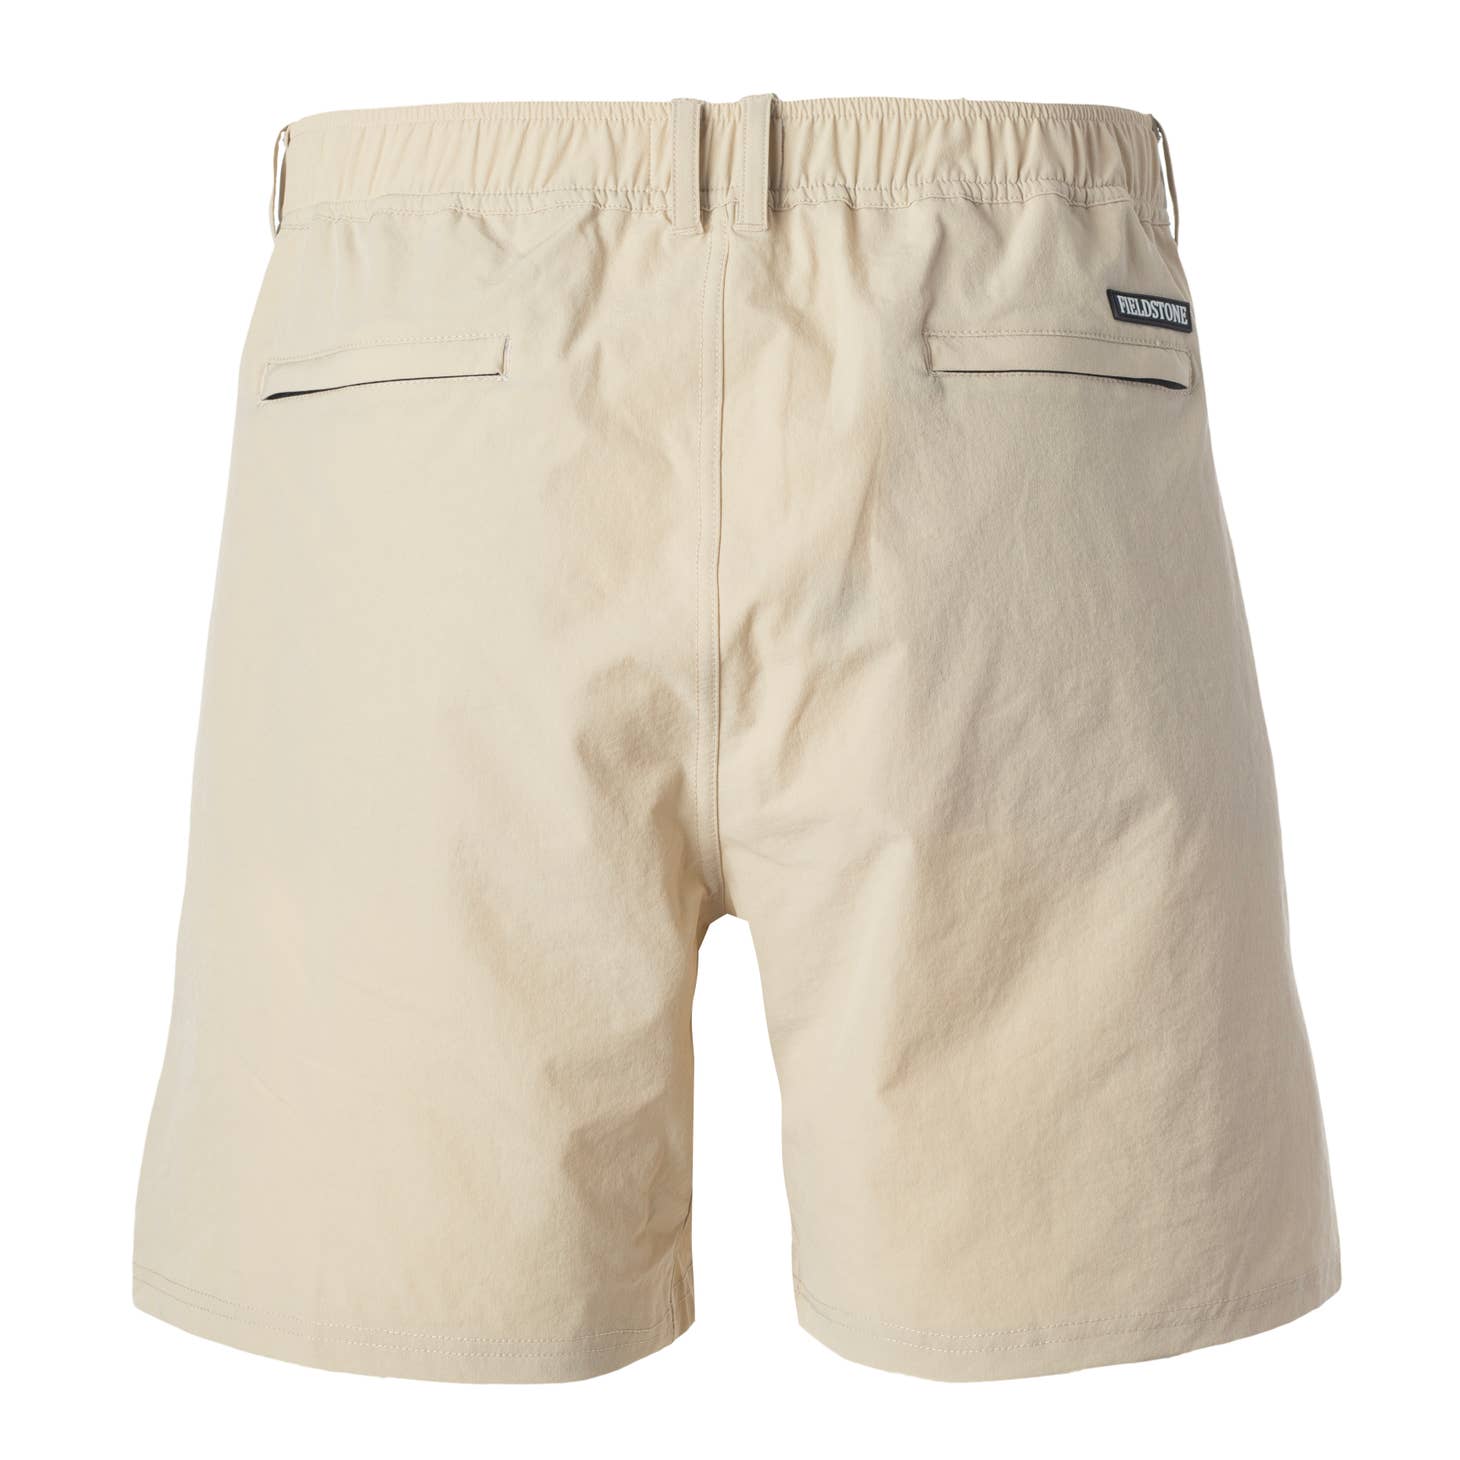 A pair of Fieldstone Outdoor Provisions Co. Rambler Shorts on a white background.